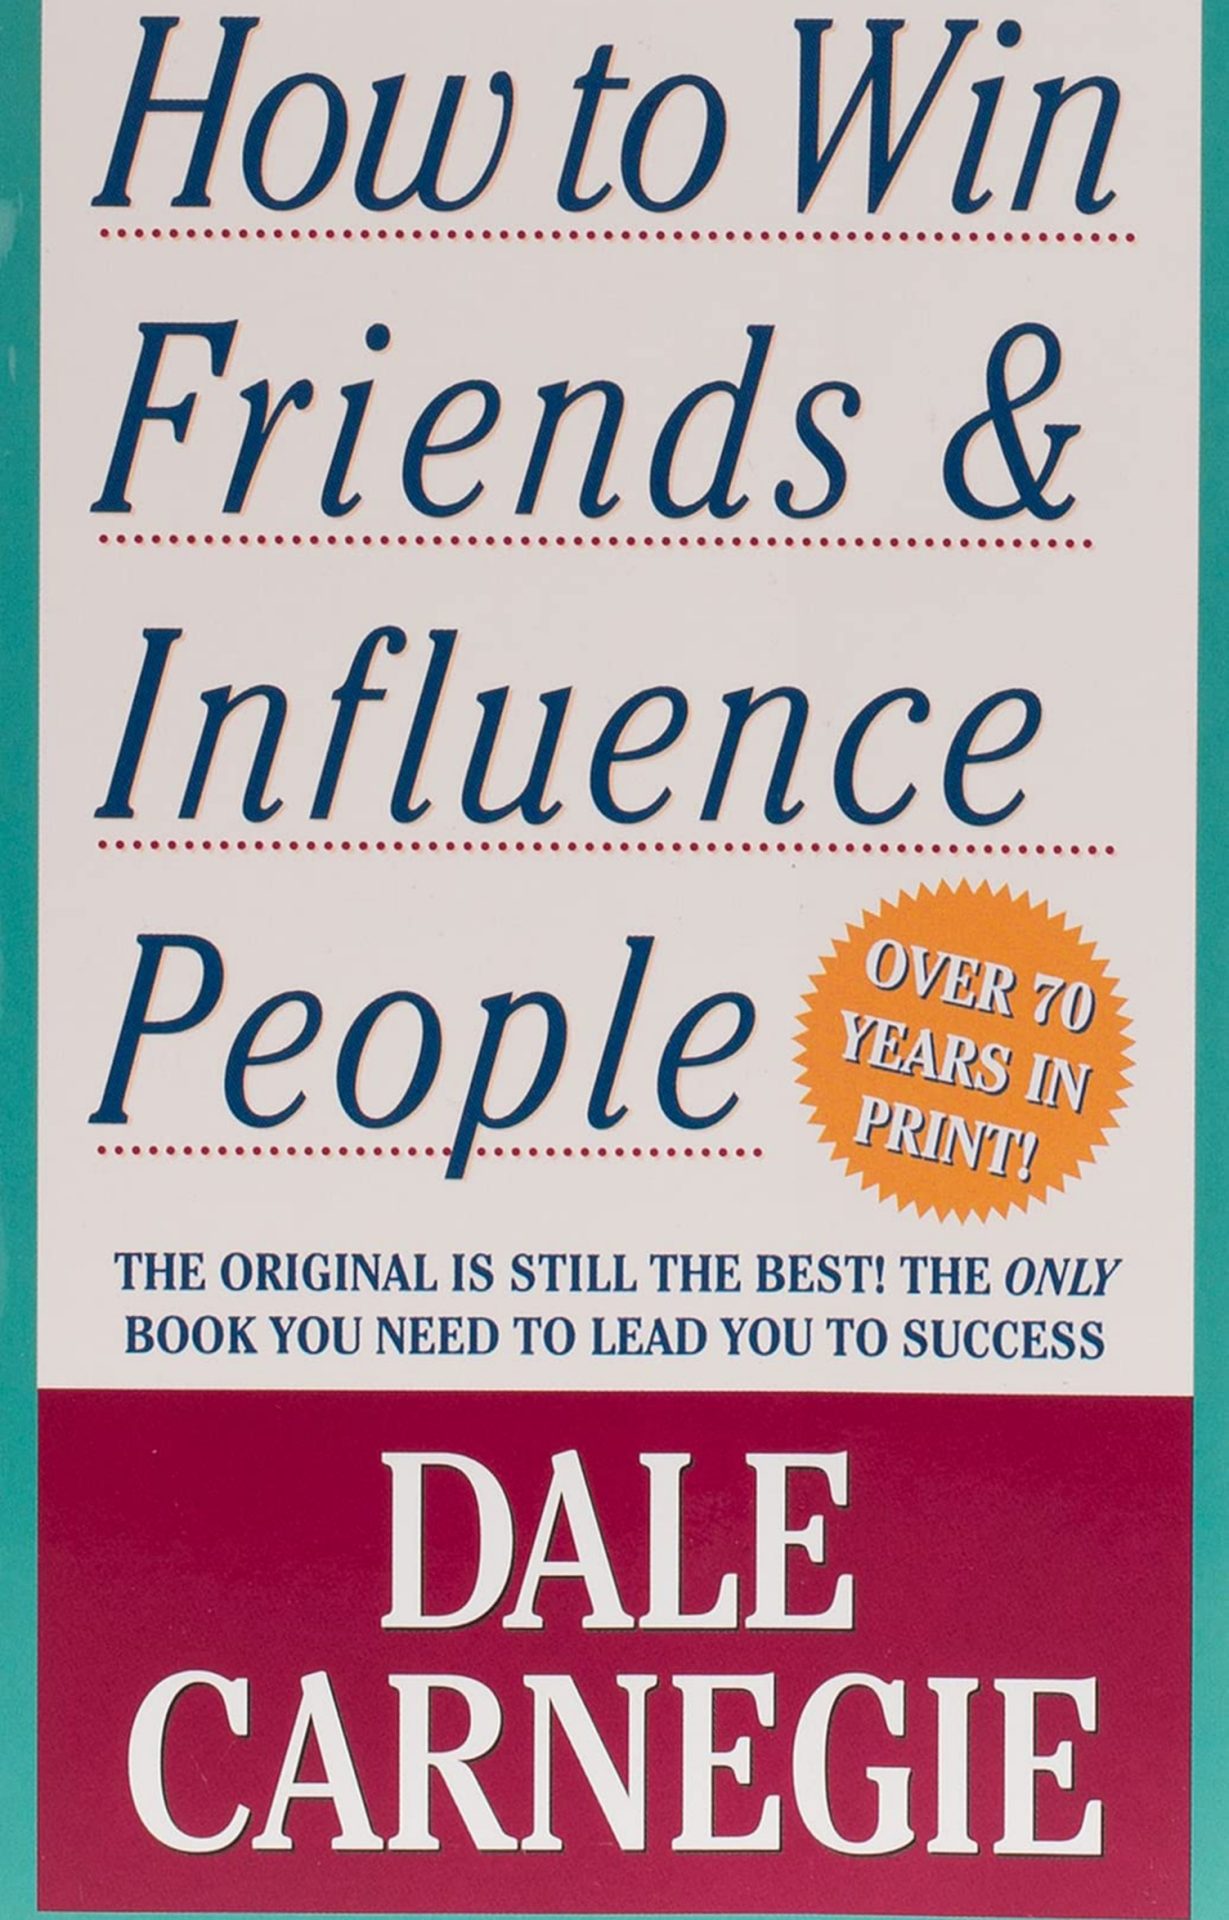 Cover of The Ritual of Making Friends: How to Win Friends and Influence Others - Dale Carnegie